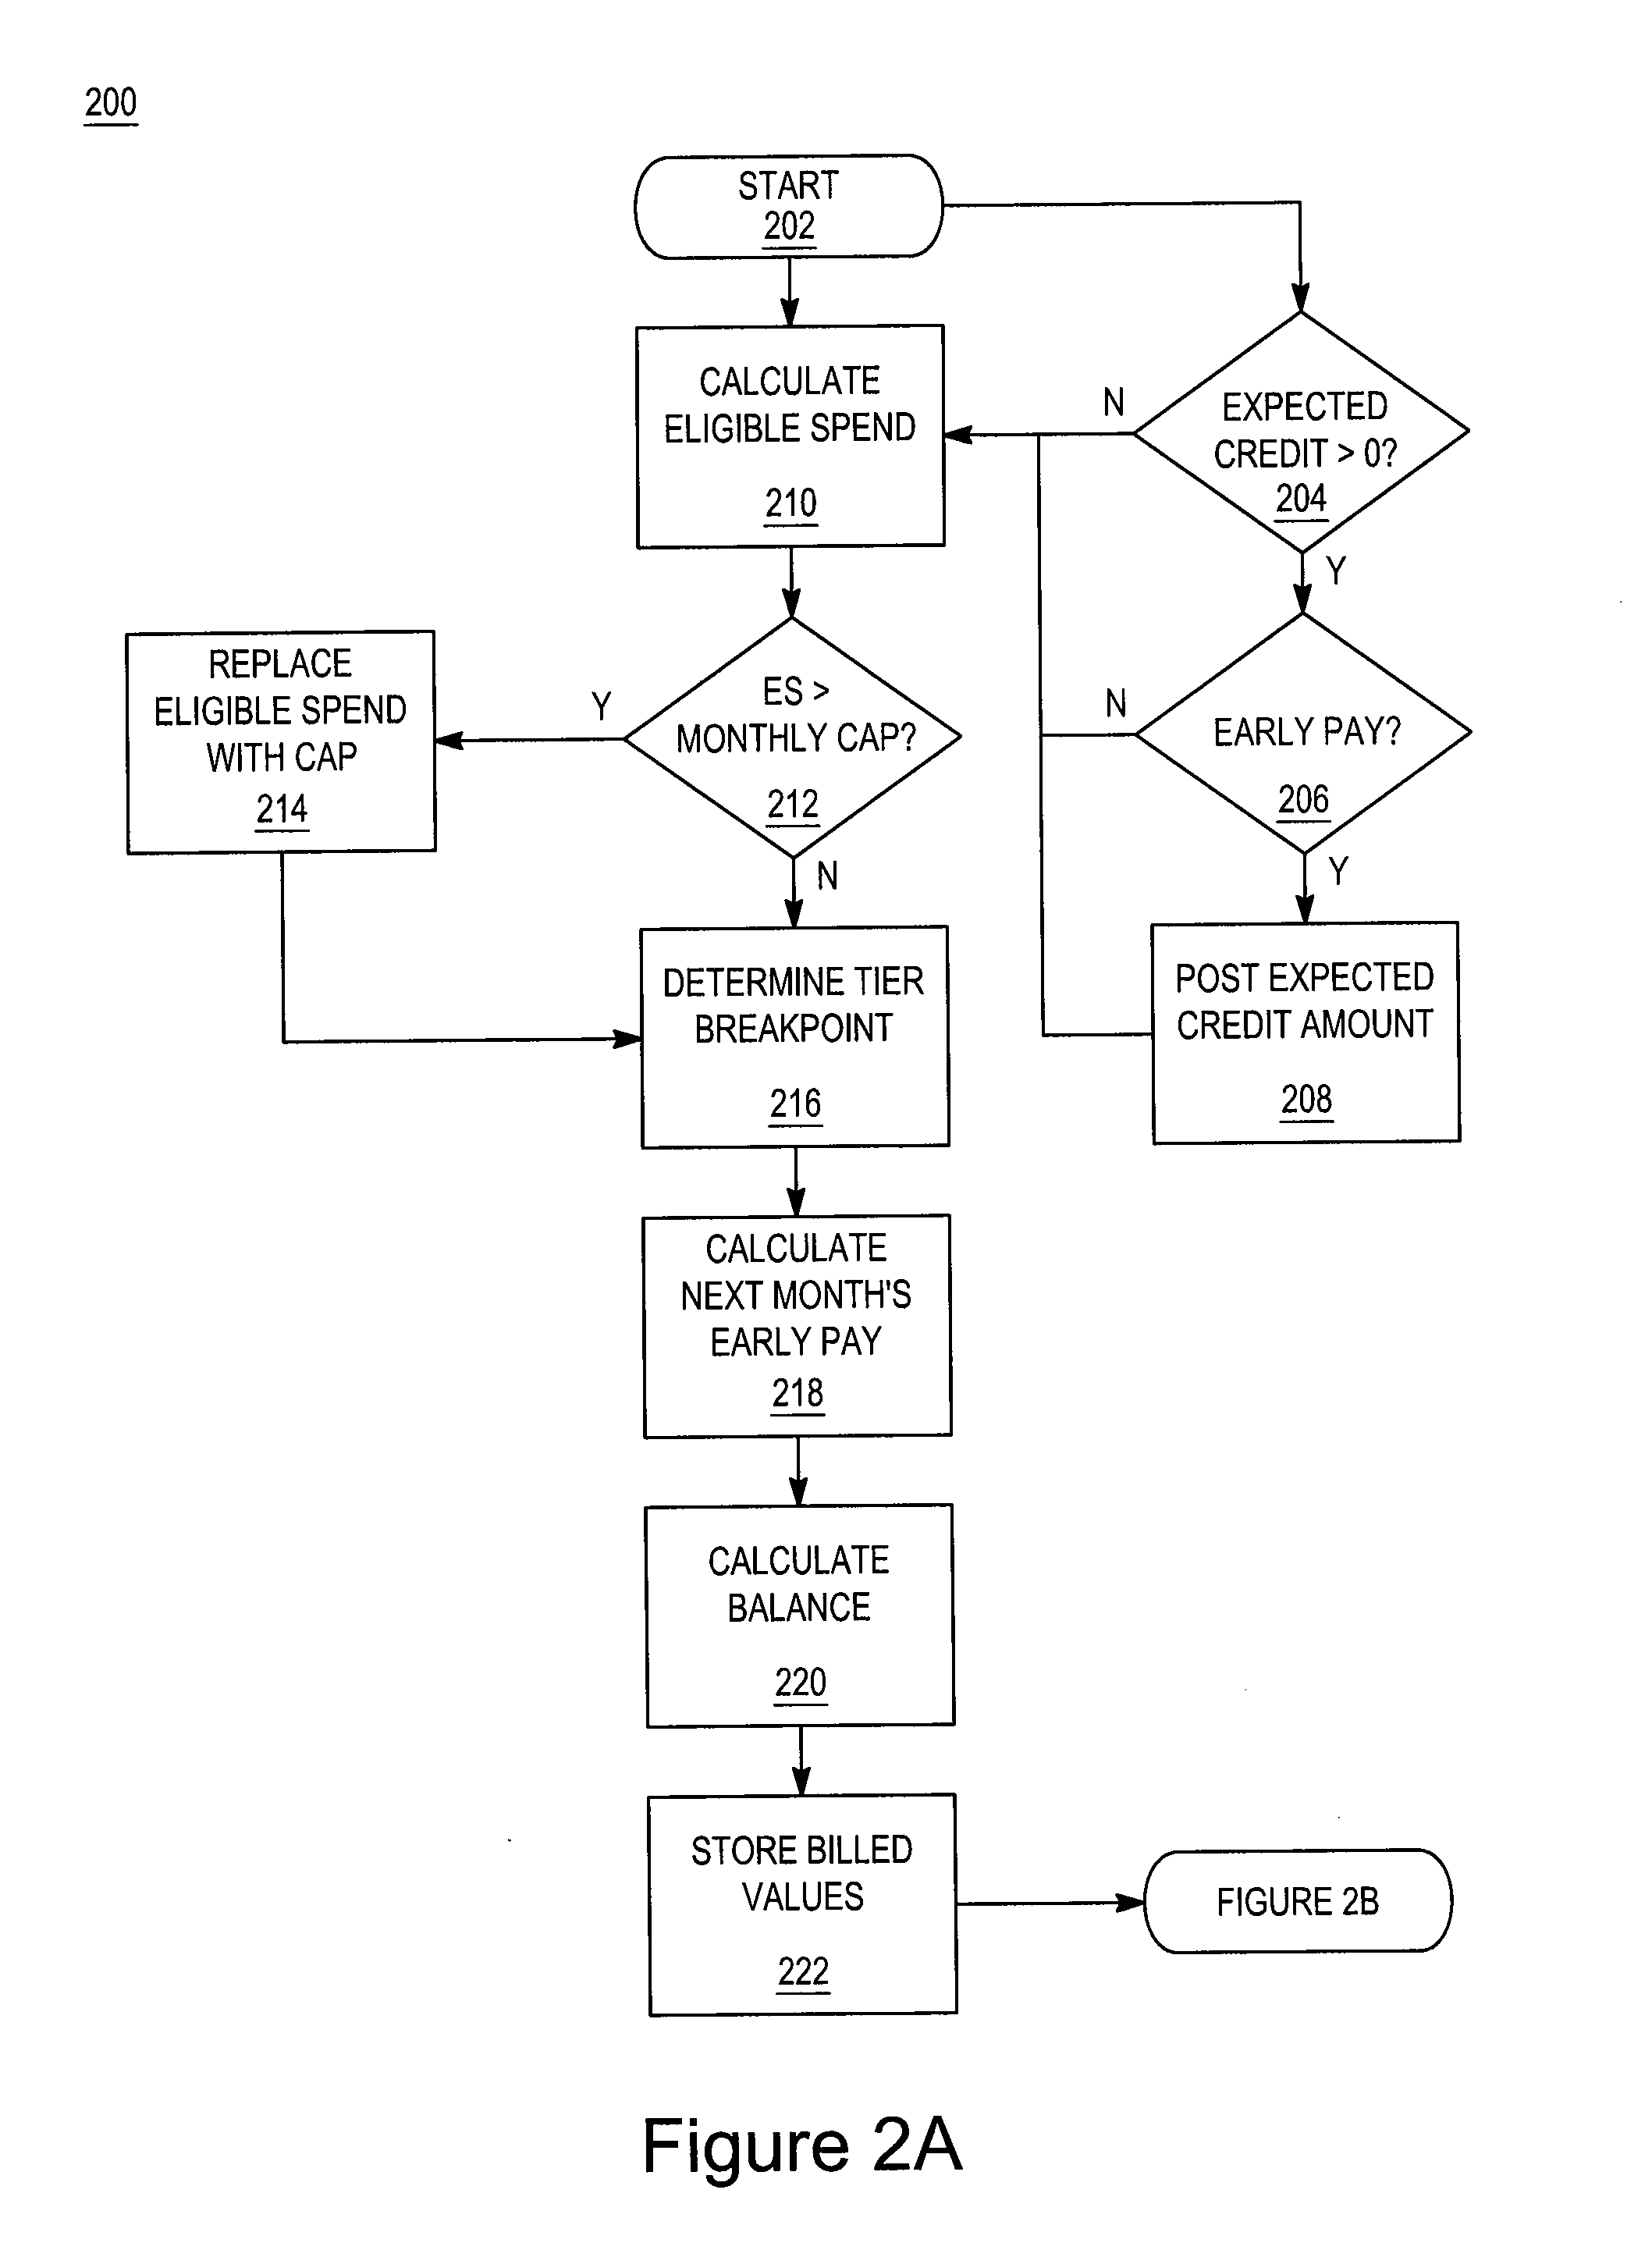 System and method for determining positive behavior and/or making awards based upon geographic location